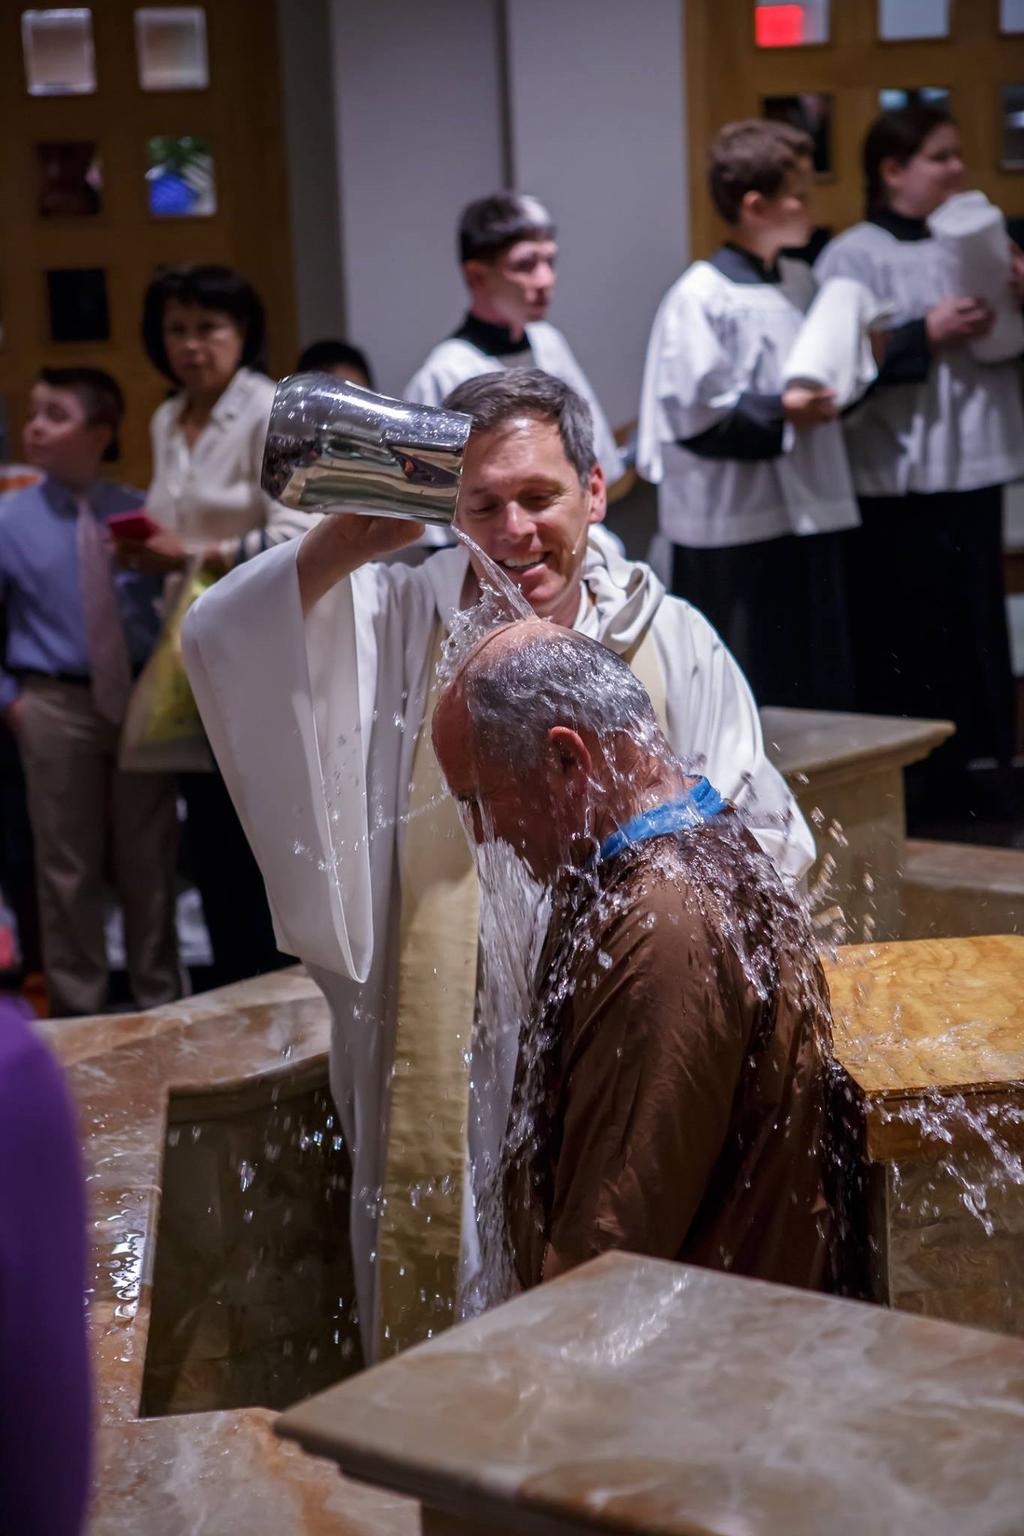 Courageously Sharing Our Faith We believe our baptism calls us to lead others to new or increased faith in Jesus Christ,.